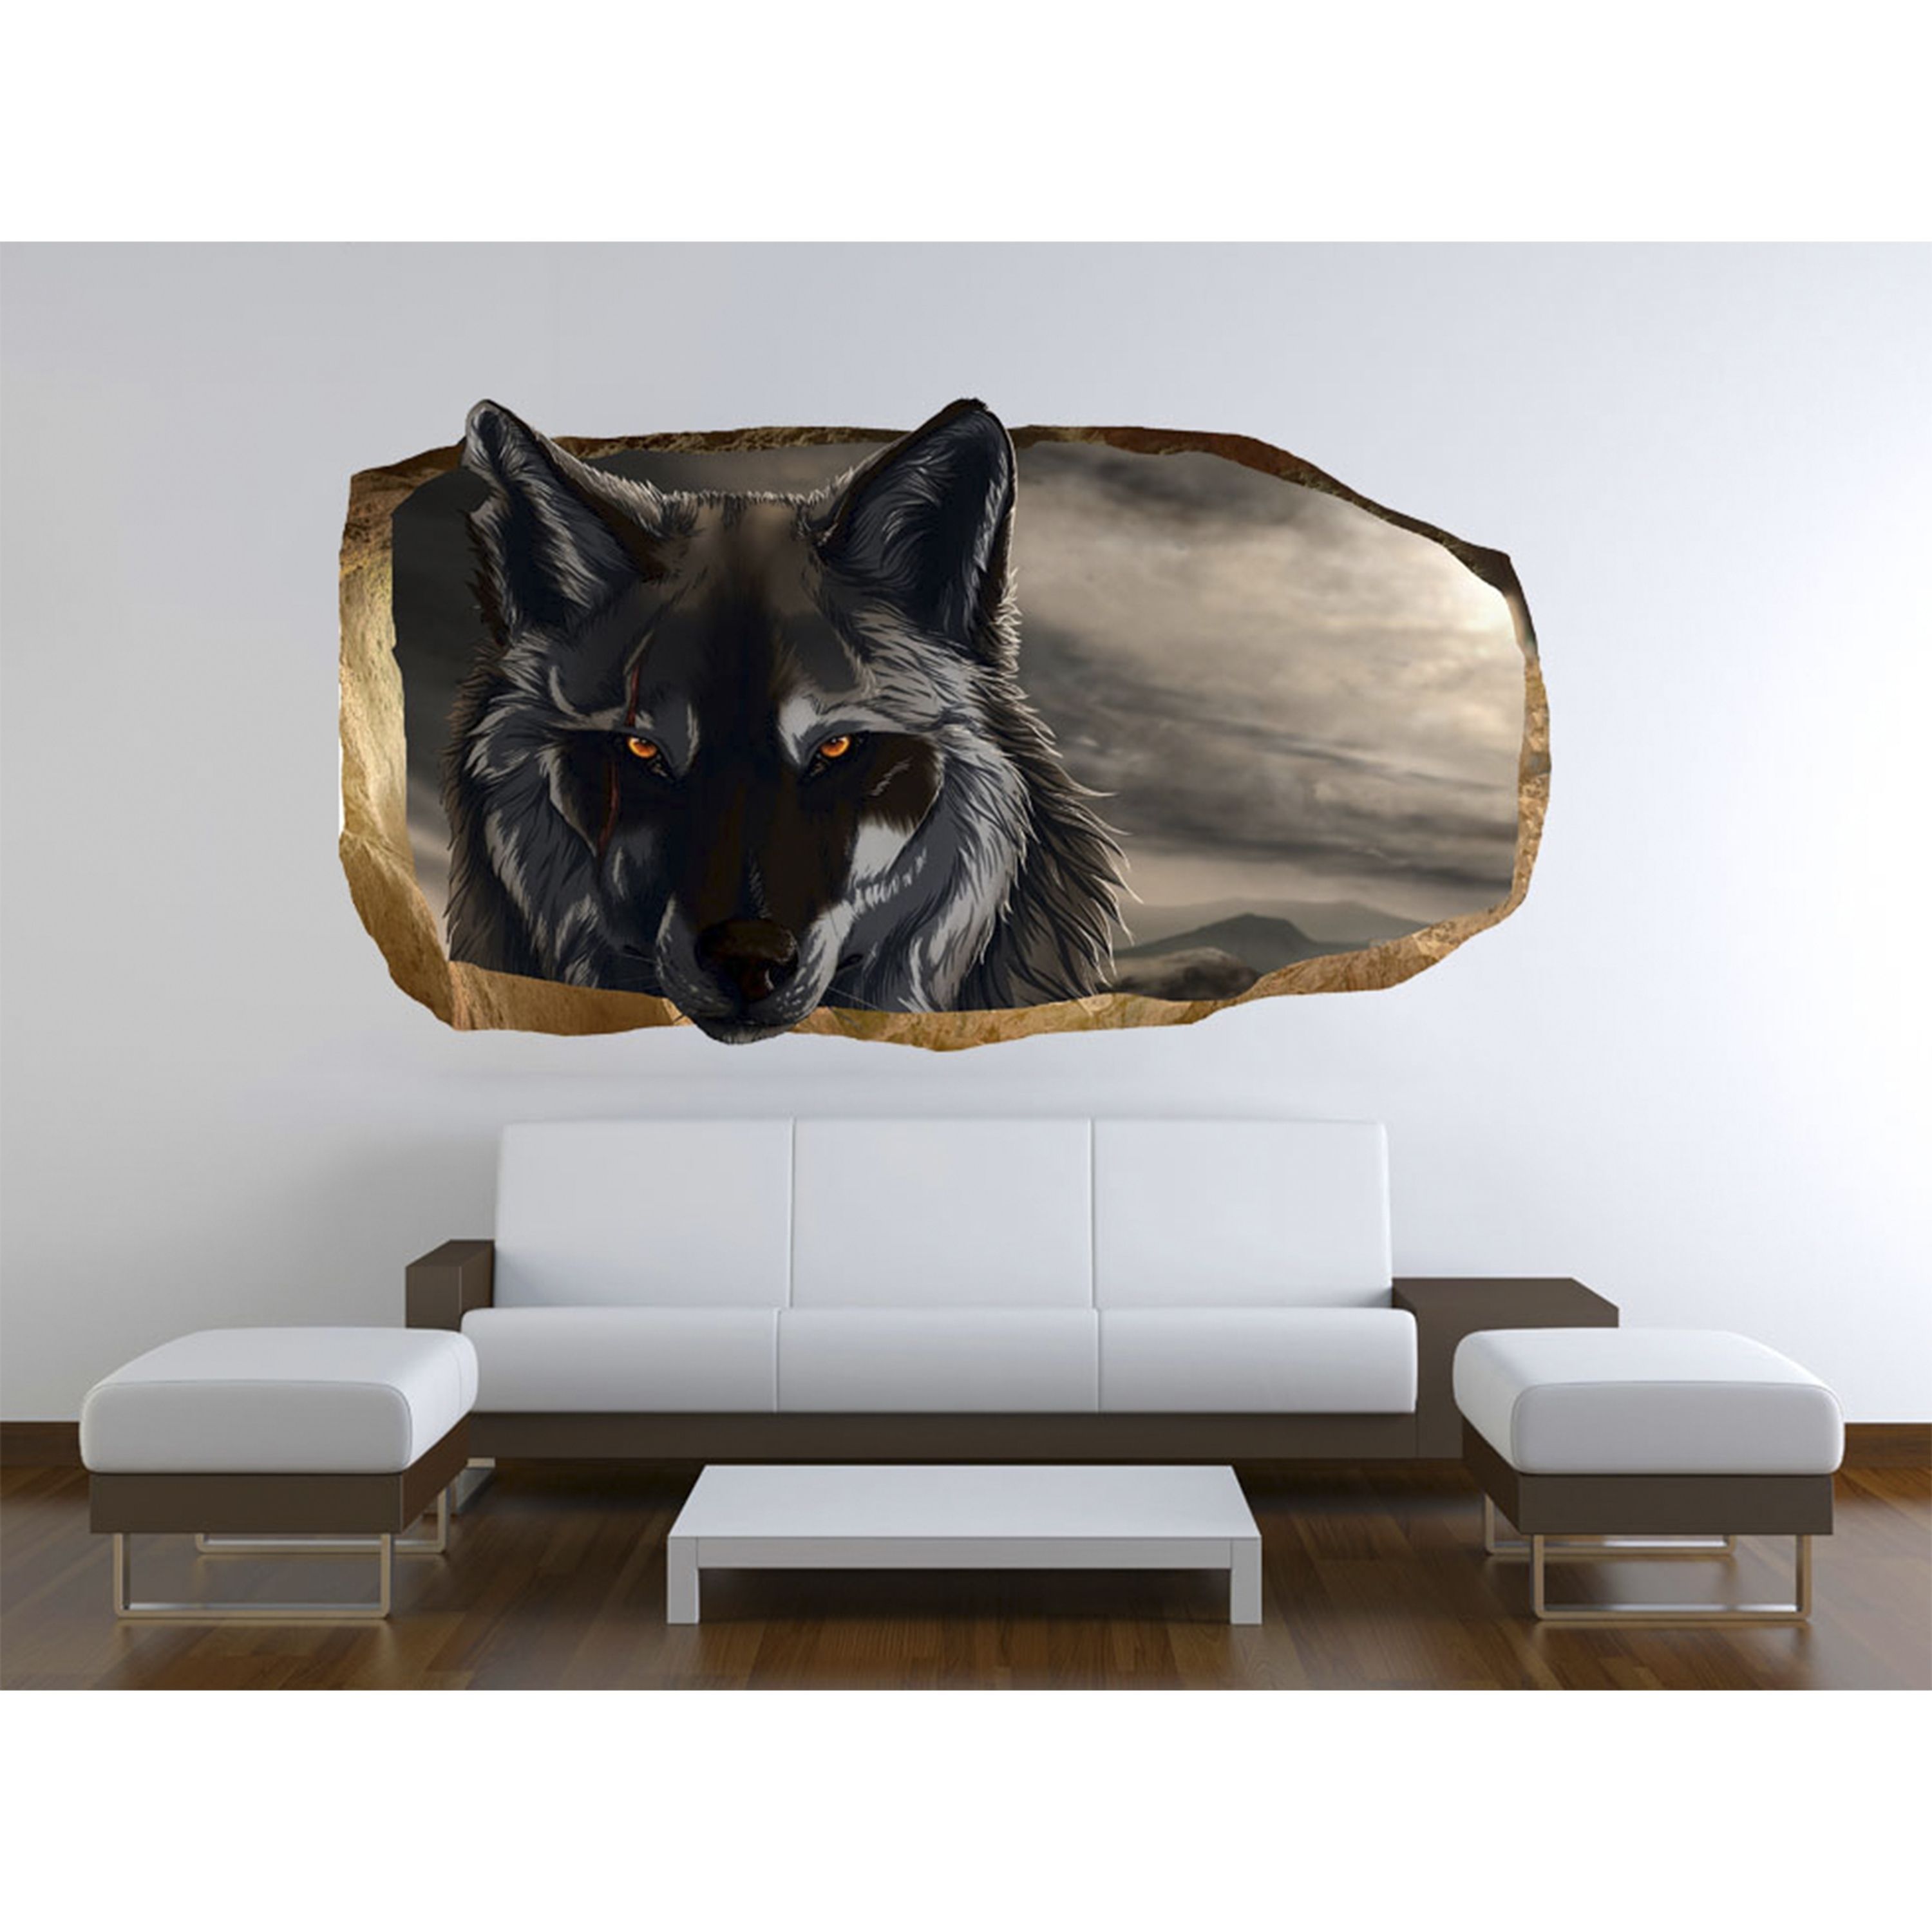 Startonight 3d Mural Wall Art Photo Decor Wolf Amazing Dual View Throughout Most Current Wolf 3d Wall Art (View 5 of 15)